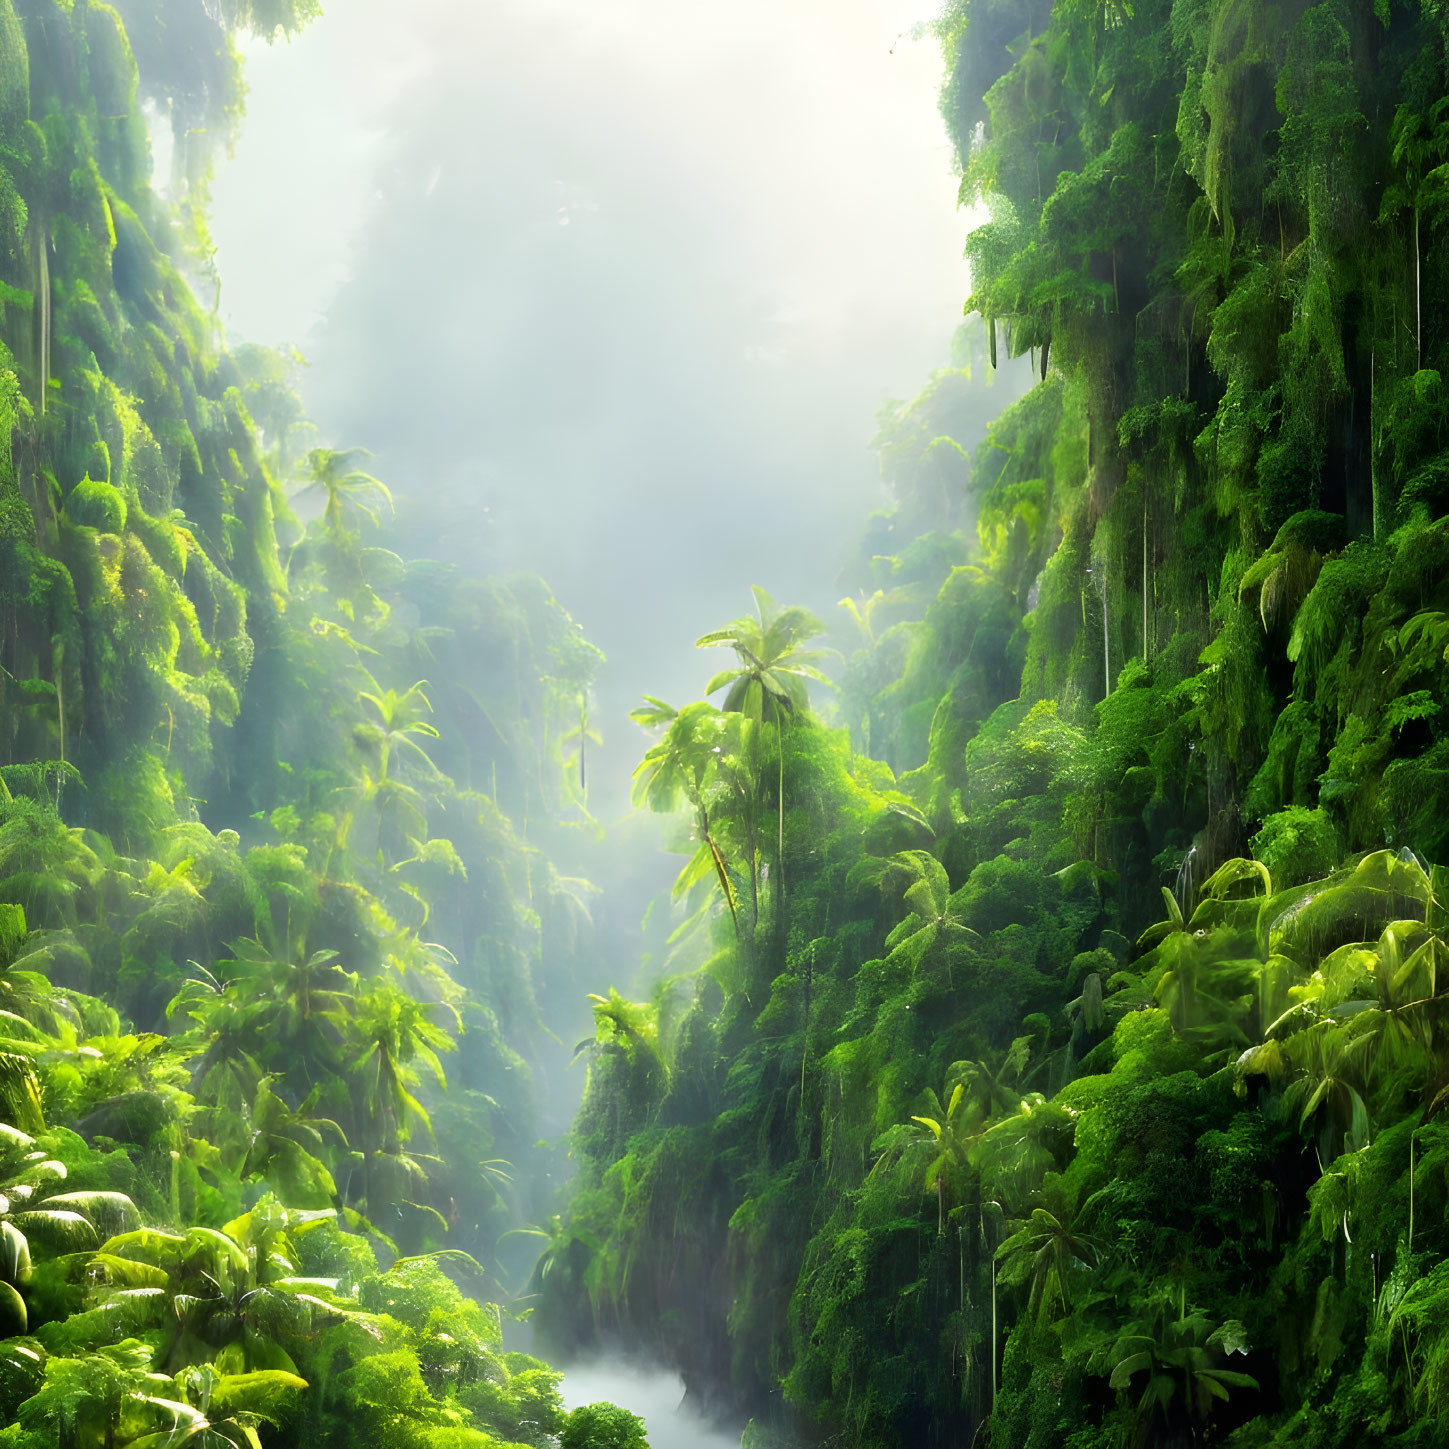 Lush Tropical Rainforest with Towering Trees and Misty Ambiance